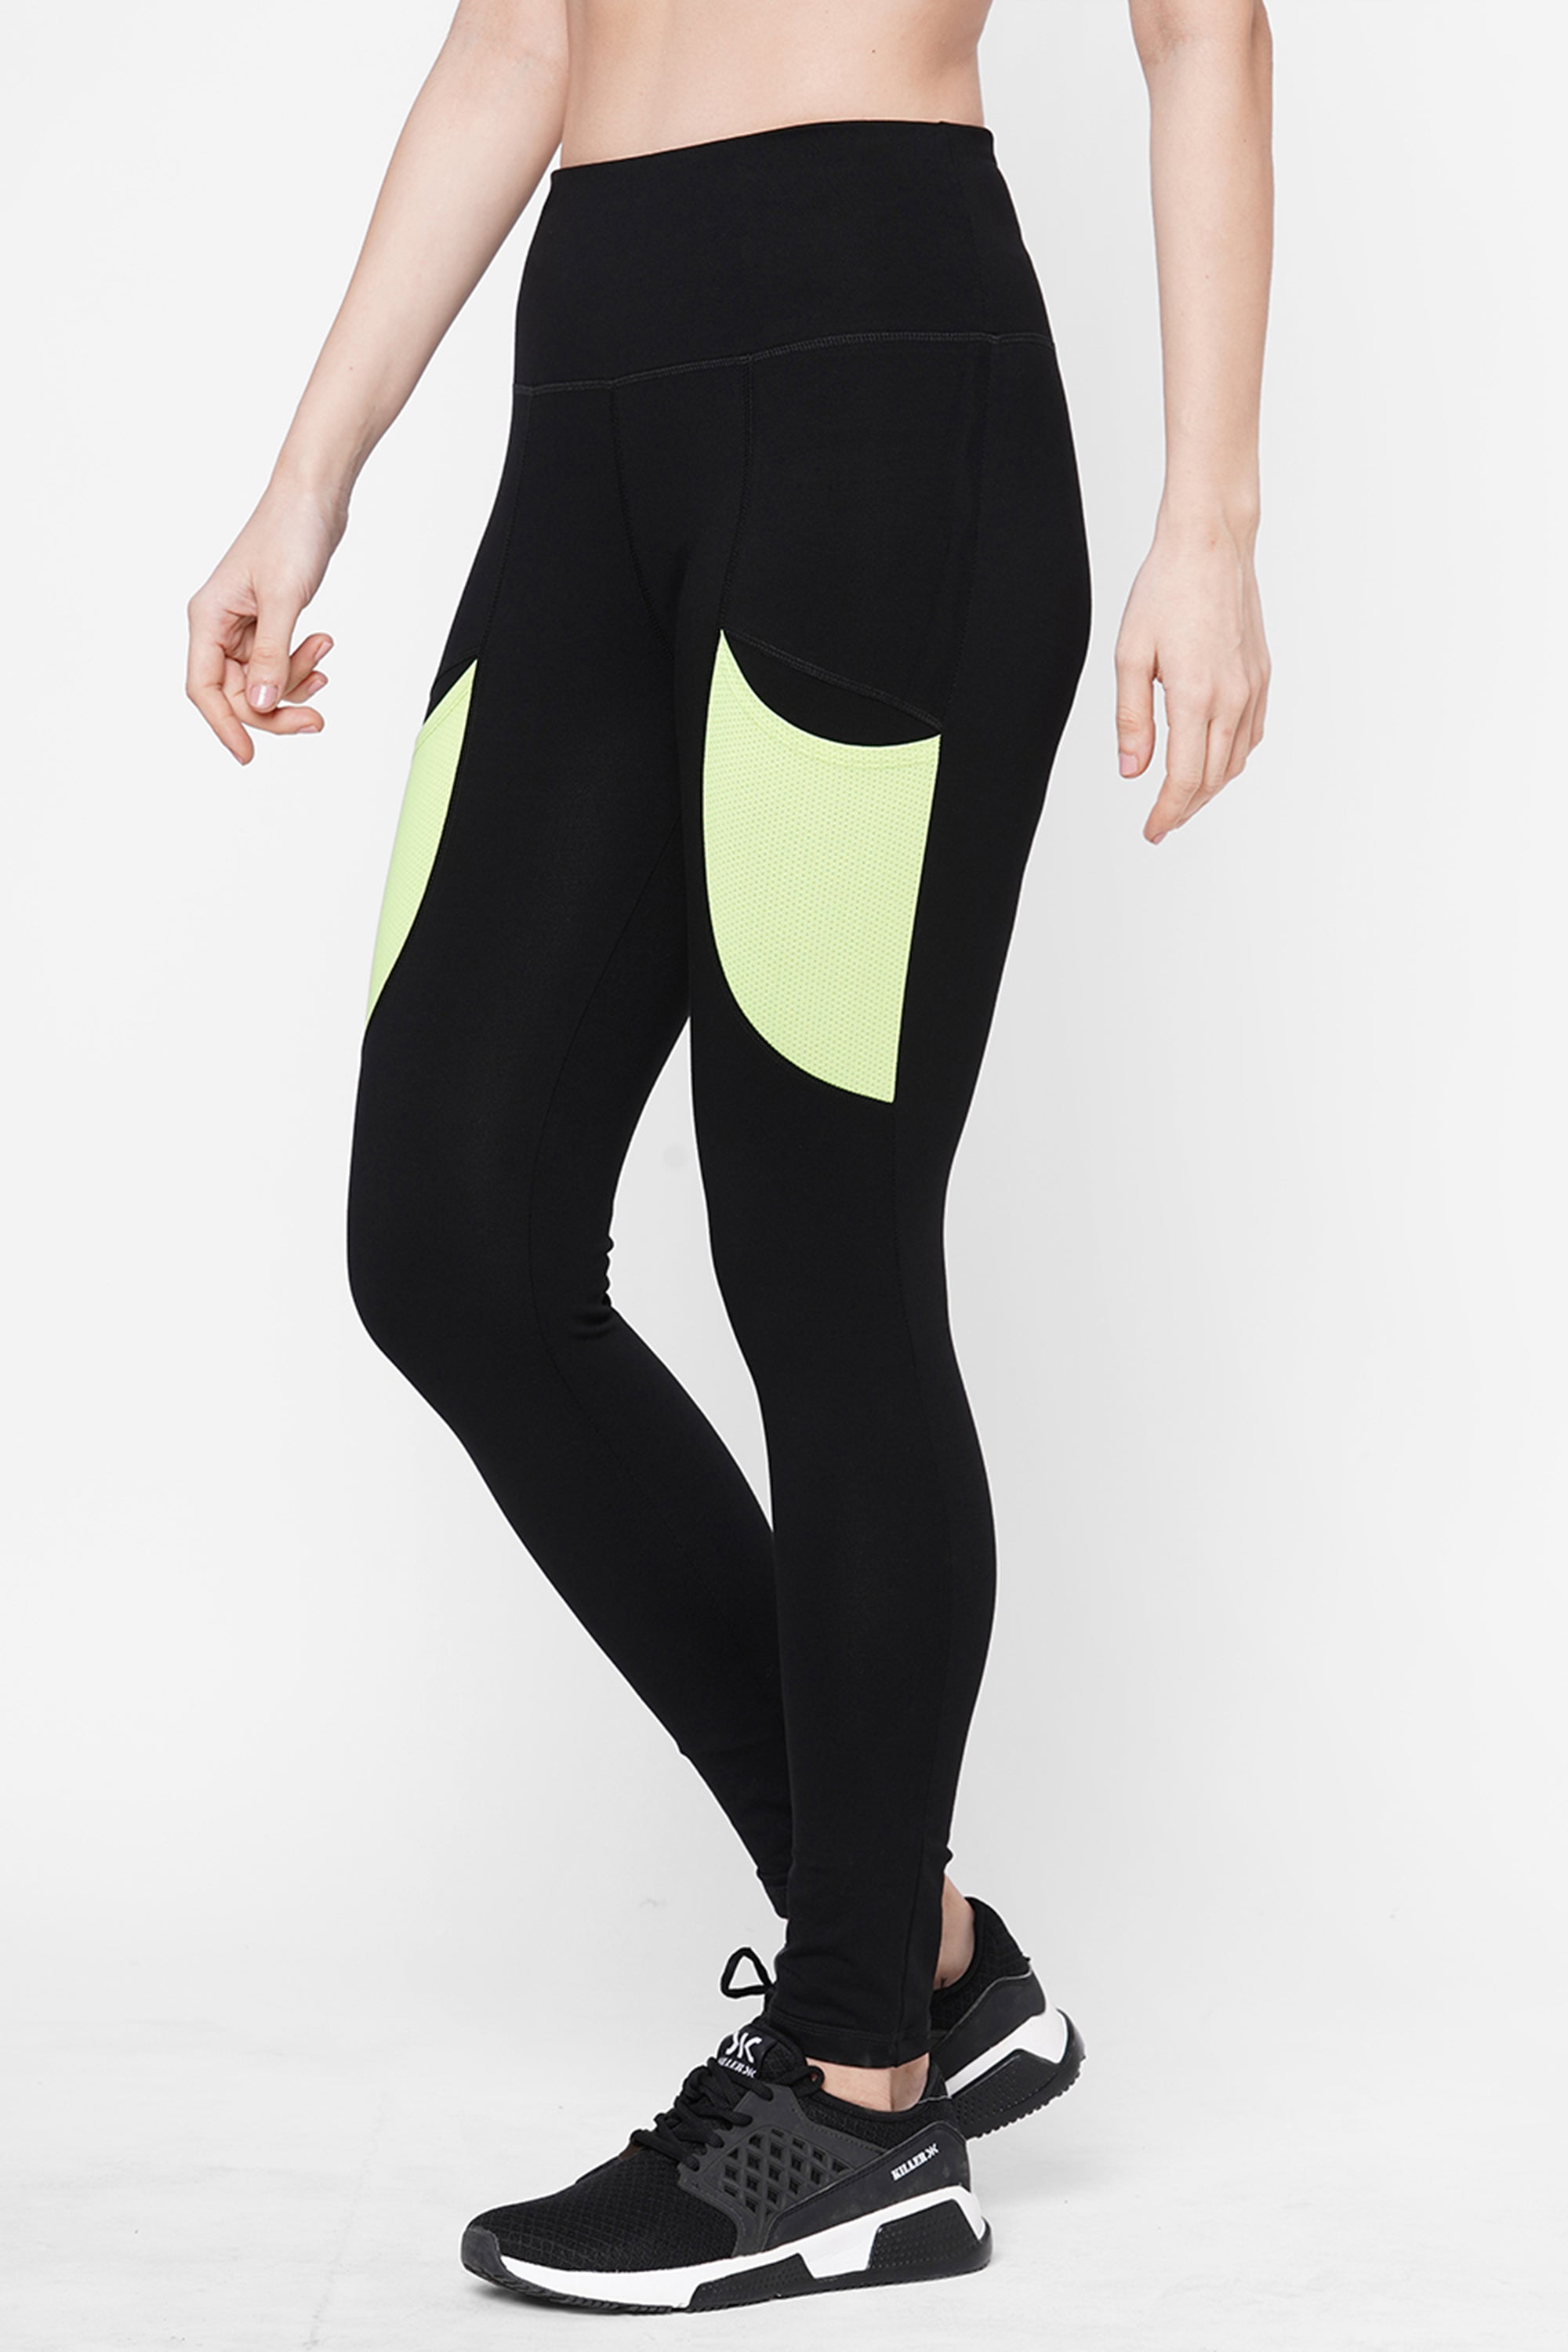 Black Leggings With Neon Green Patch